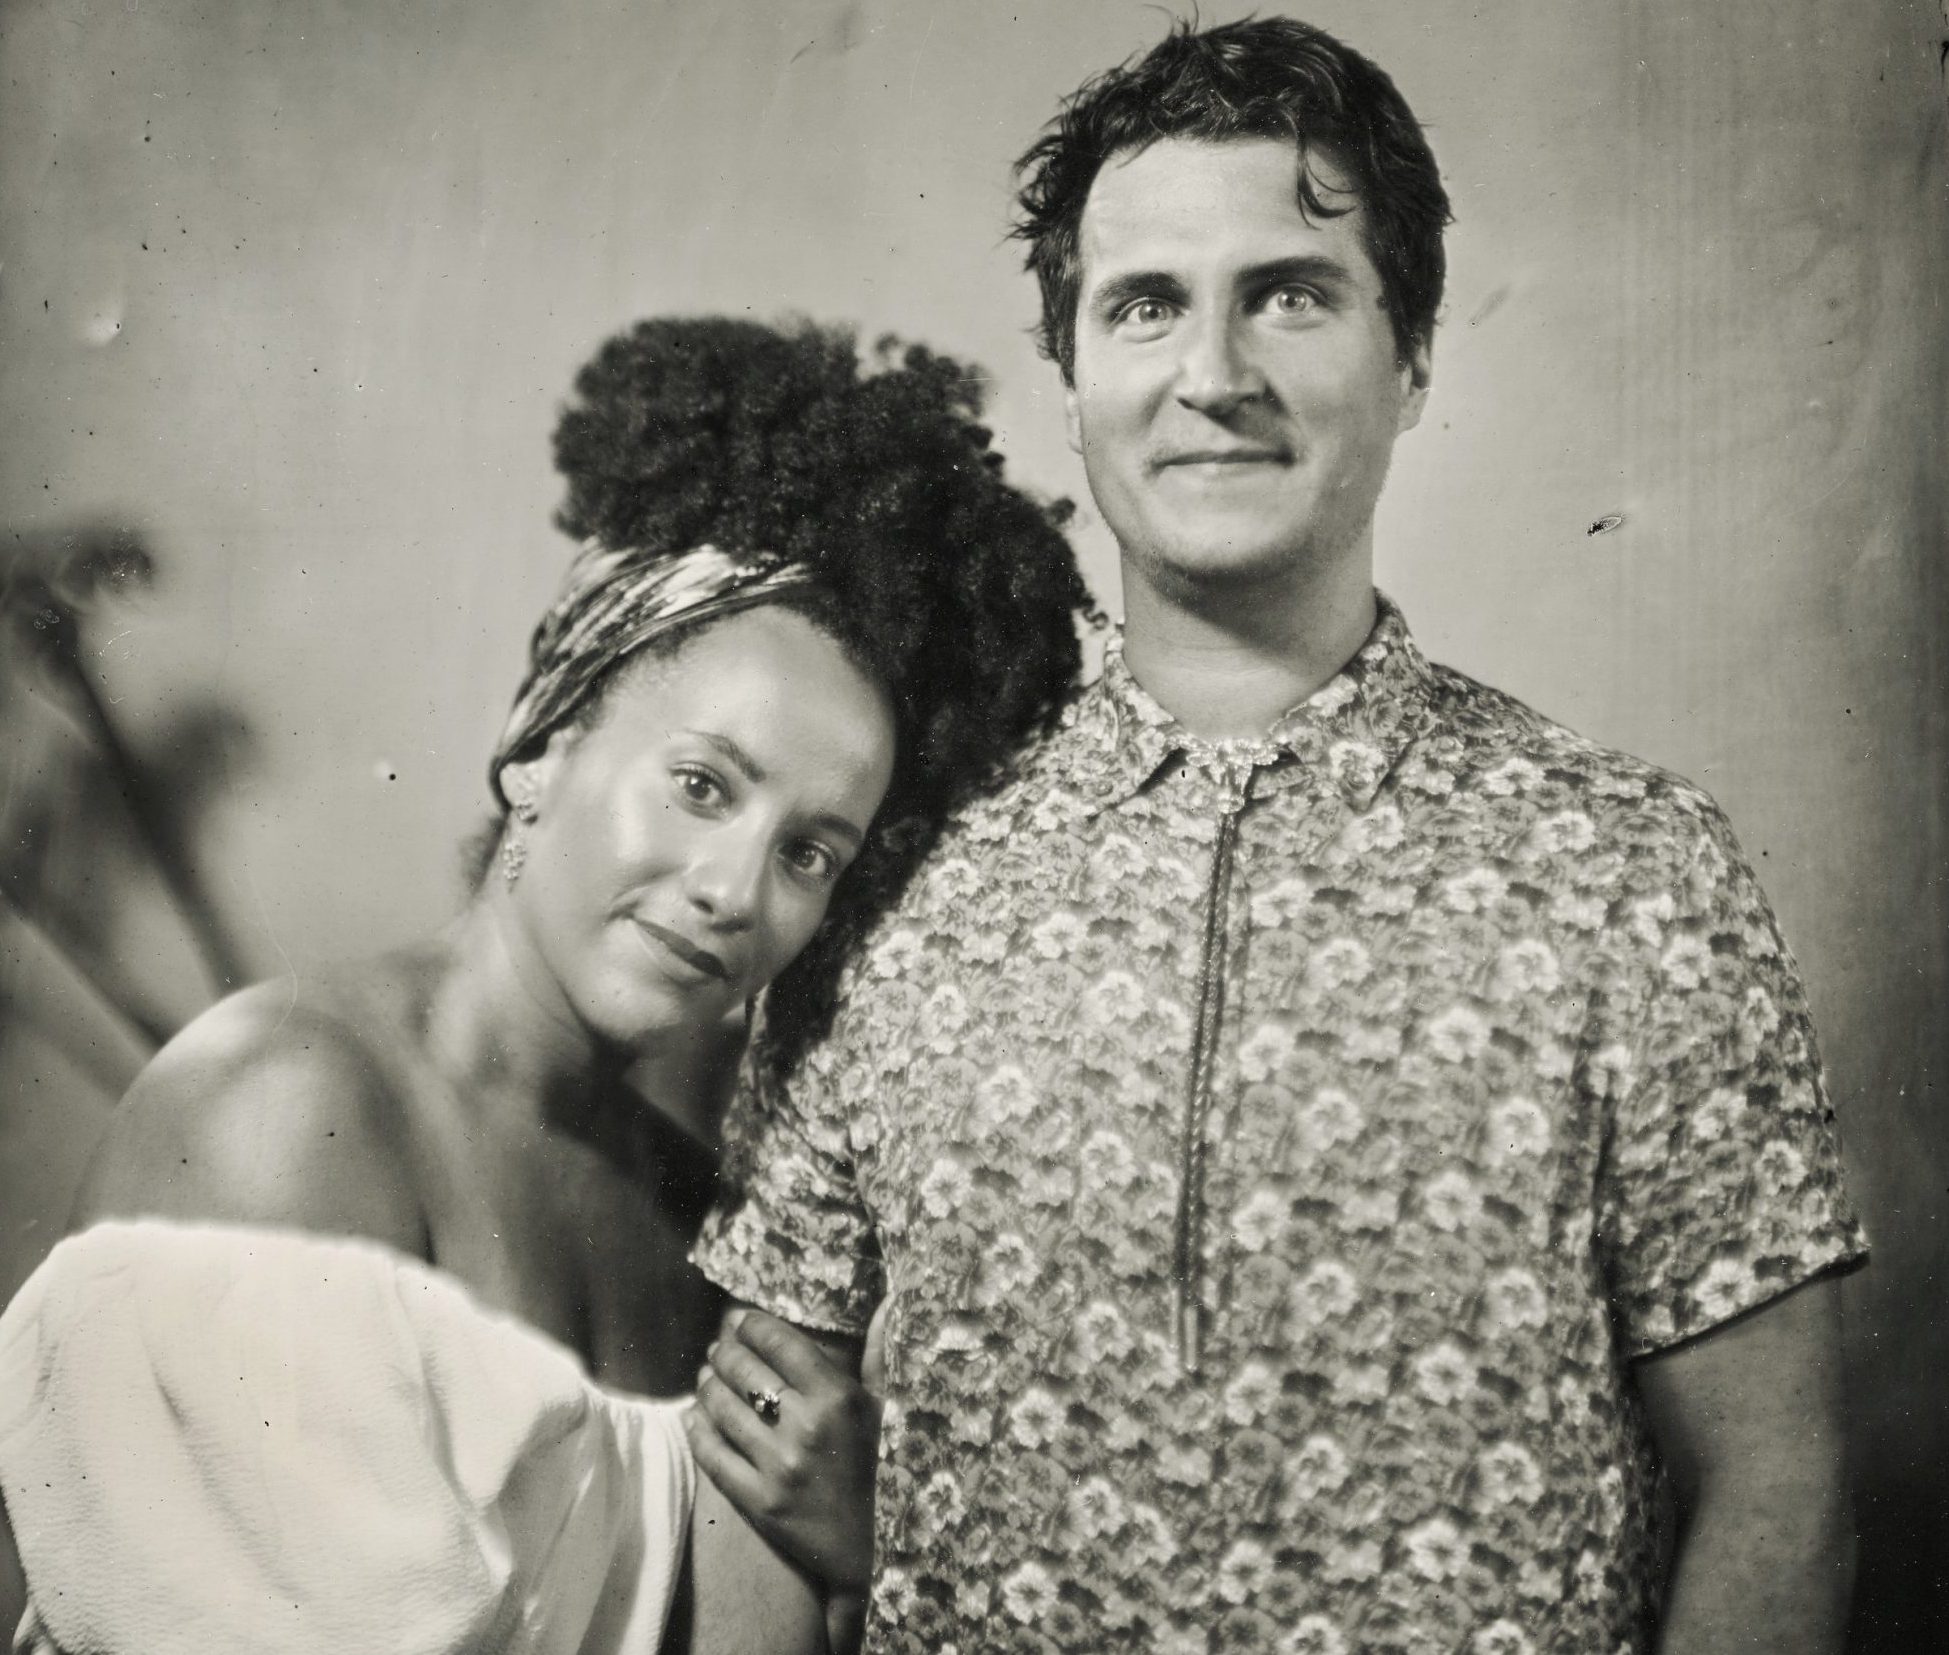 Tintype photograph of a couple